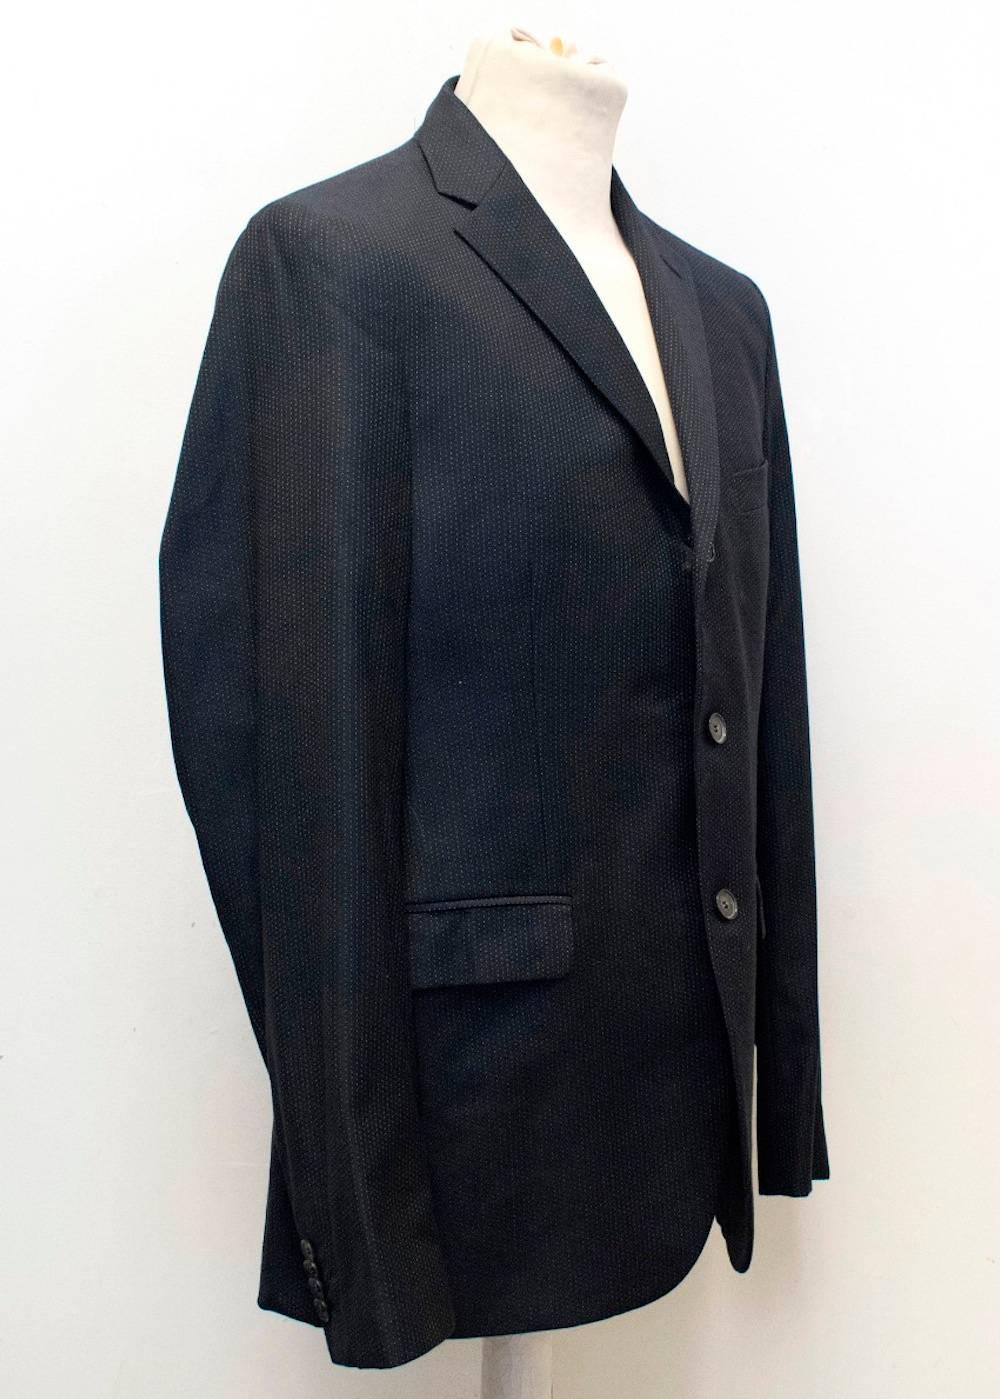 Acne men's navy blue jacket and trouser  with white pinpoint print. The jacket is fully lined and includes notch lapel, two vents at the back, diagonal chest pocket, two pockets at the front. The trousers feature a small v detail at the top back and